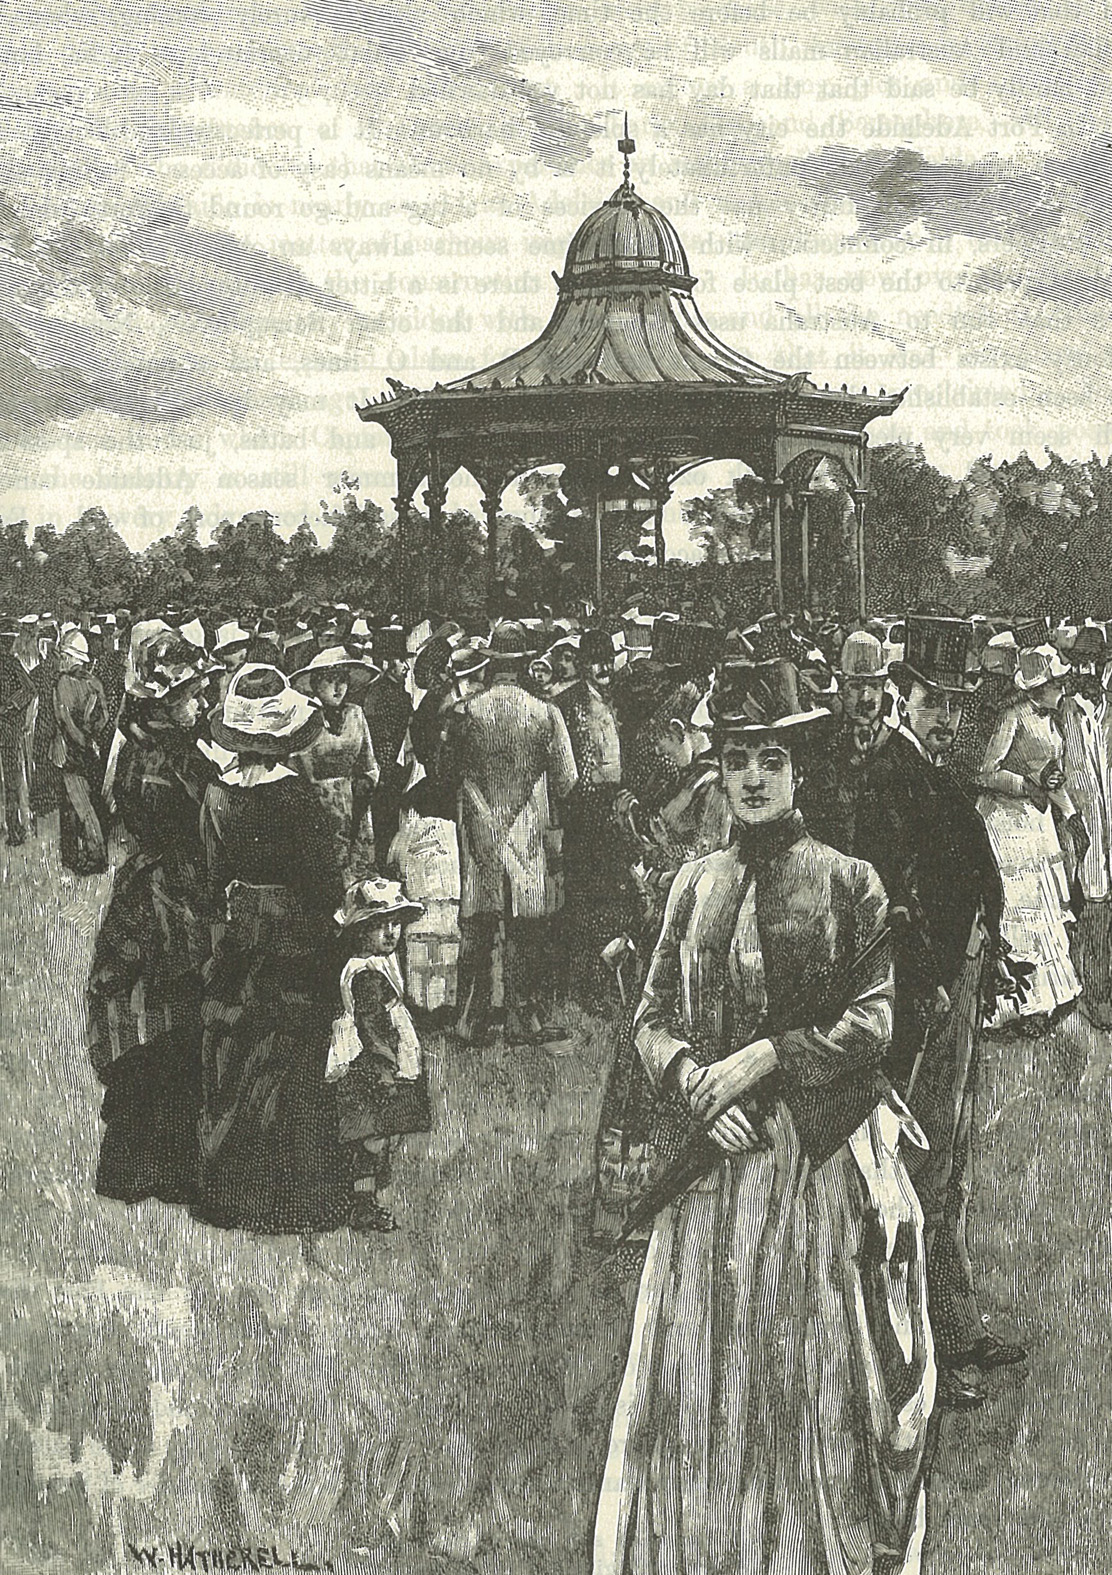 Typical public crowd attending a concert at the Rotunda c.1888 (Cassell’s Picturesque Australasia).